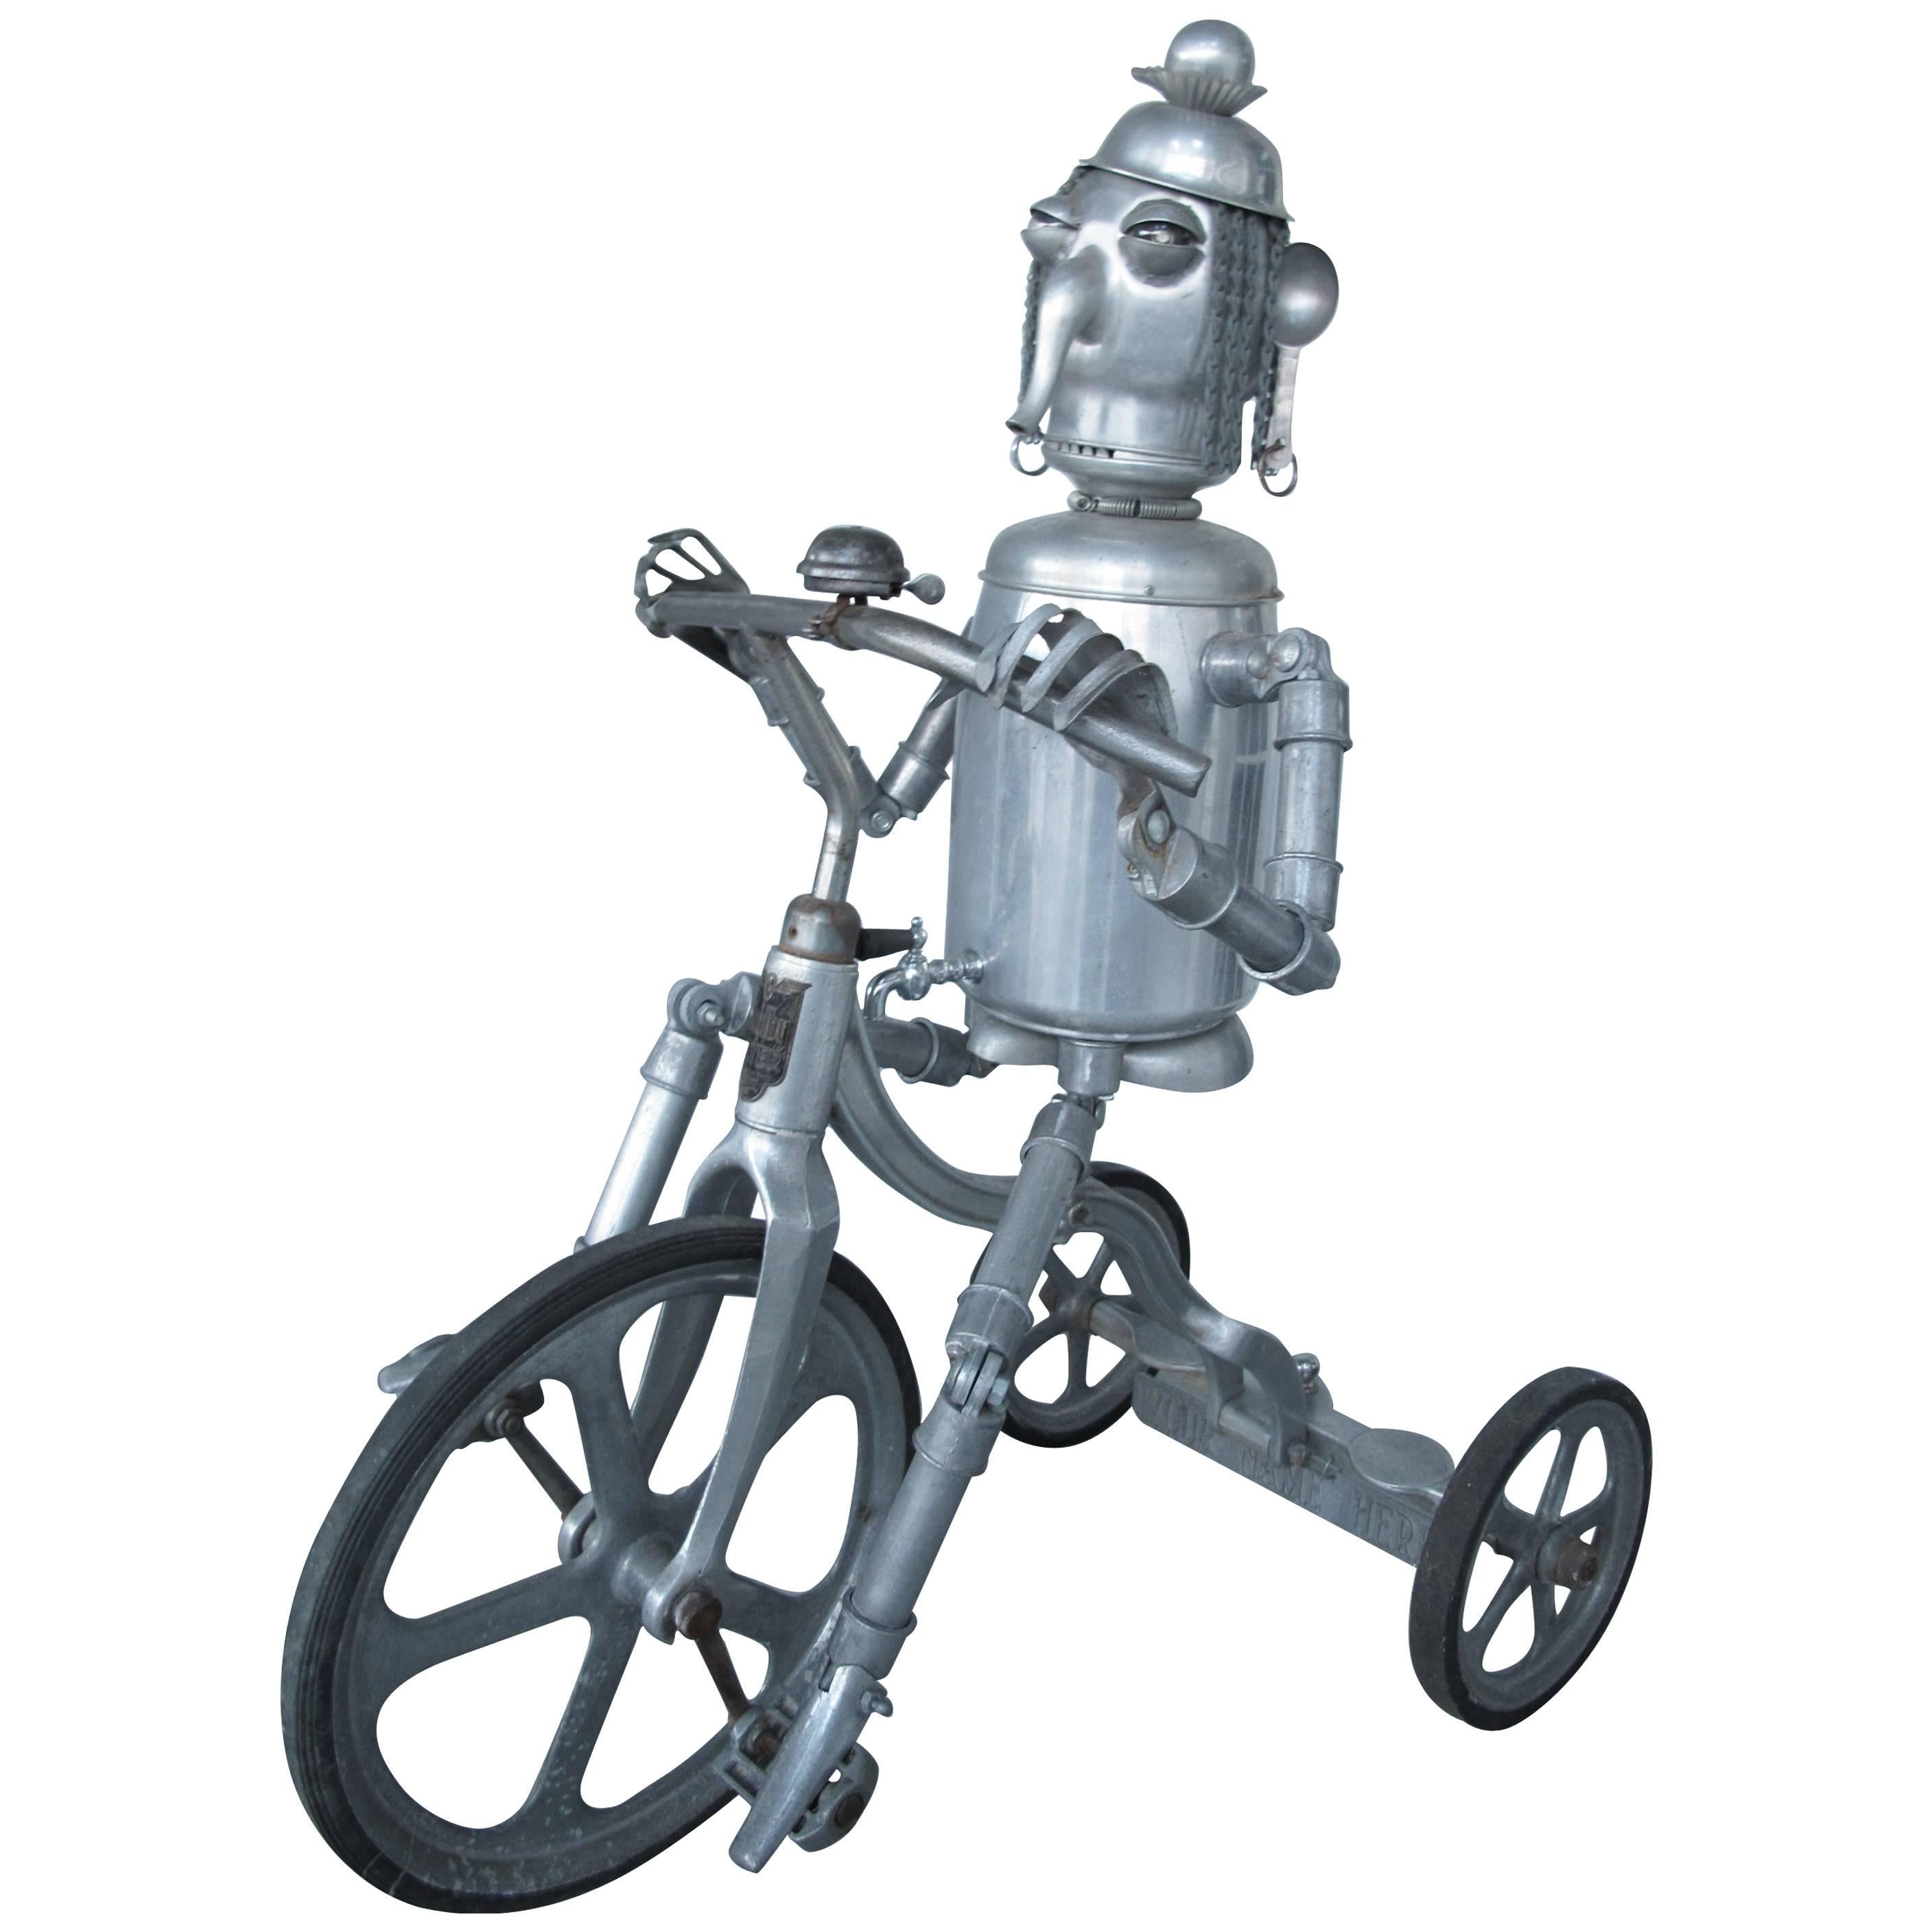 Robot Riding an Aluminum Tricycle For Sale